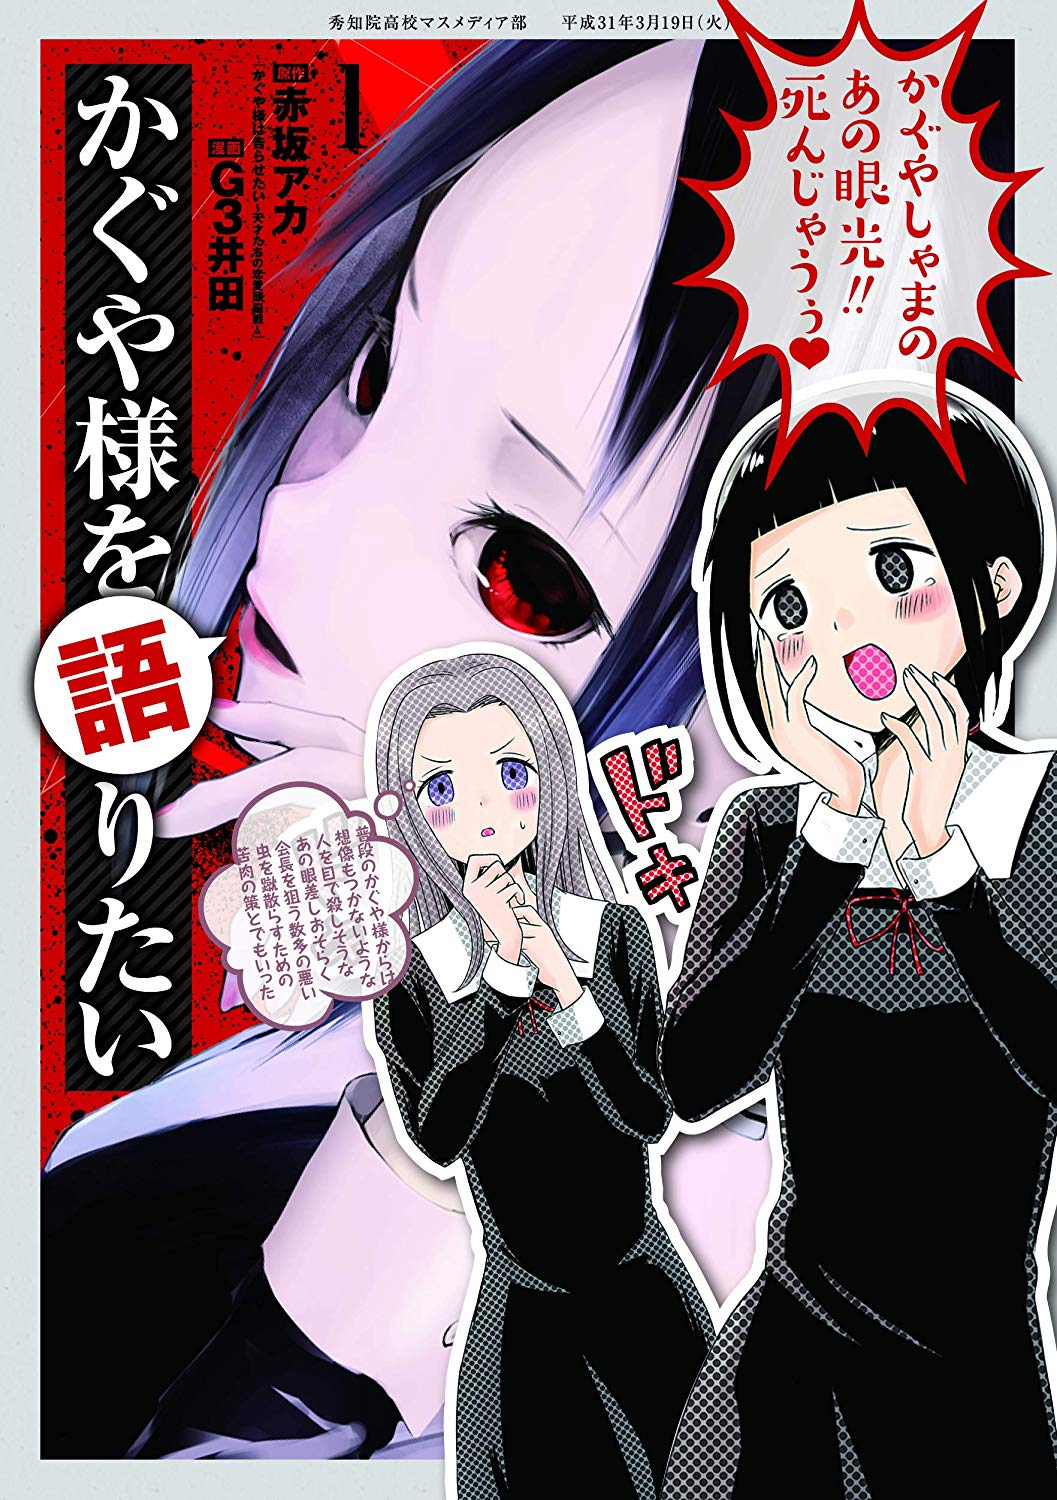 Do you think its possible for the first episode of season 4 to begin/end on  this panel? : r/Kaguya_sama